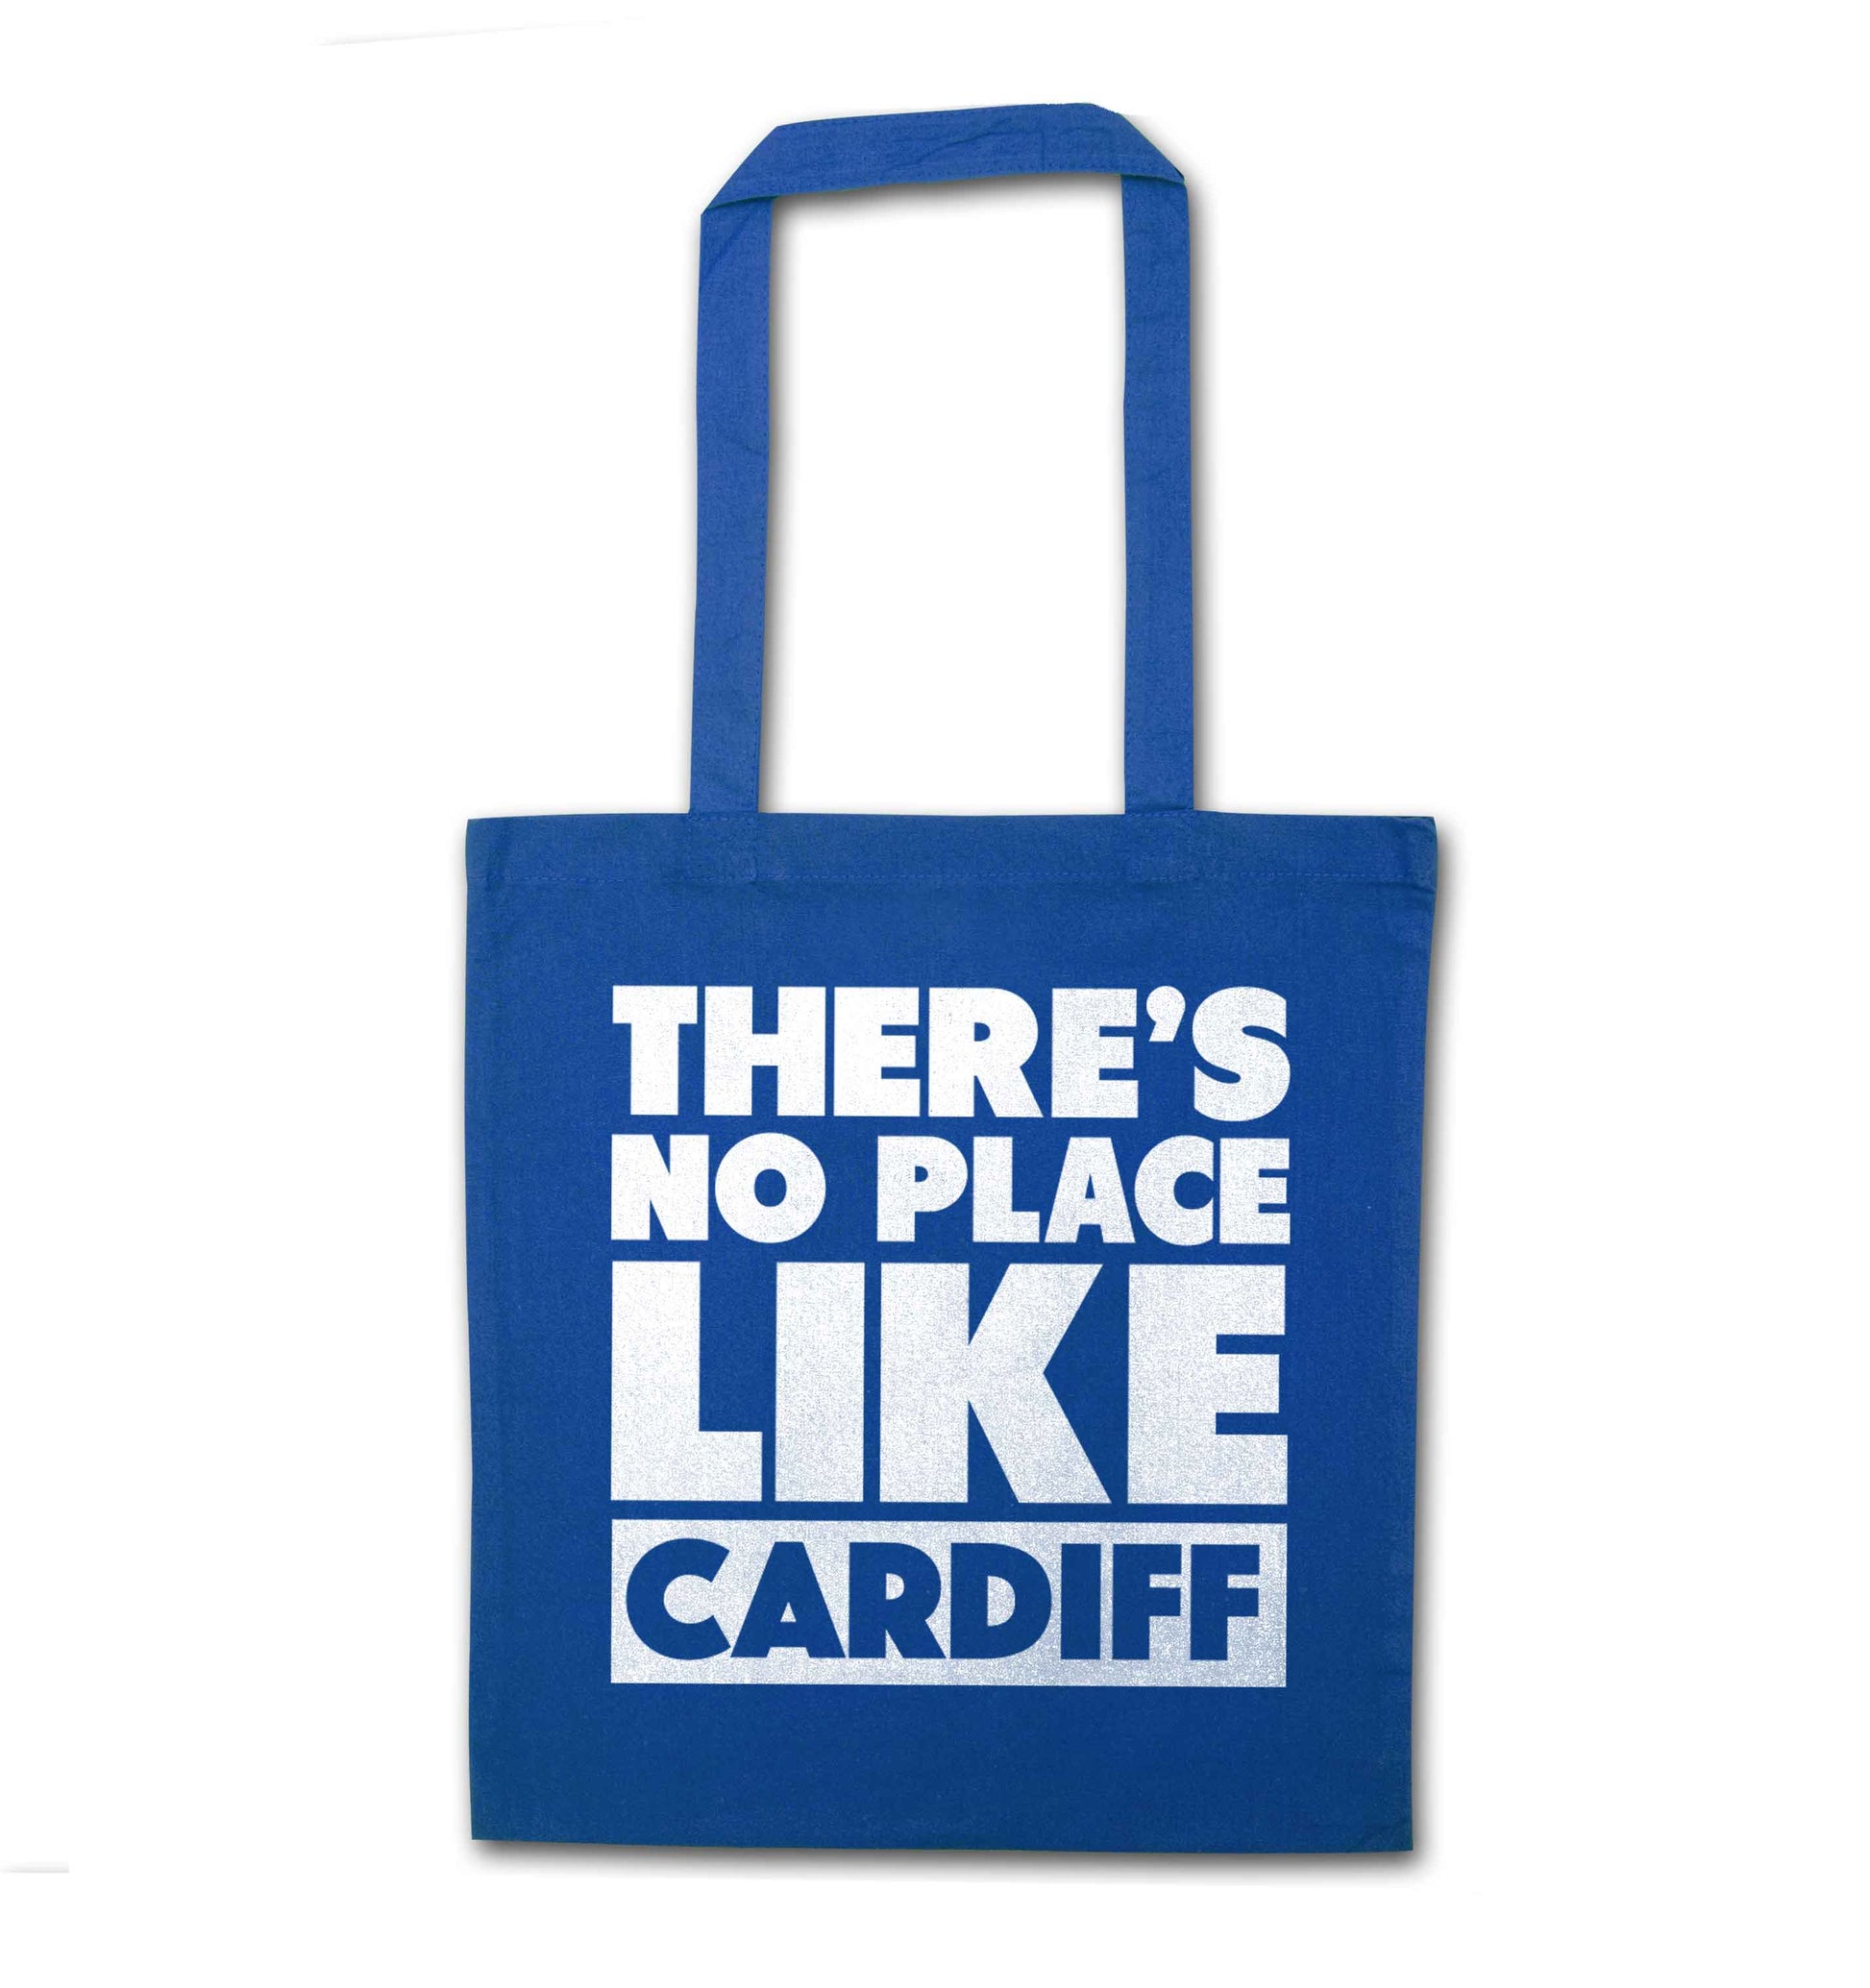 There's no place like Cardiff blue tote bag